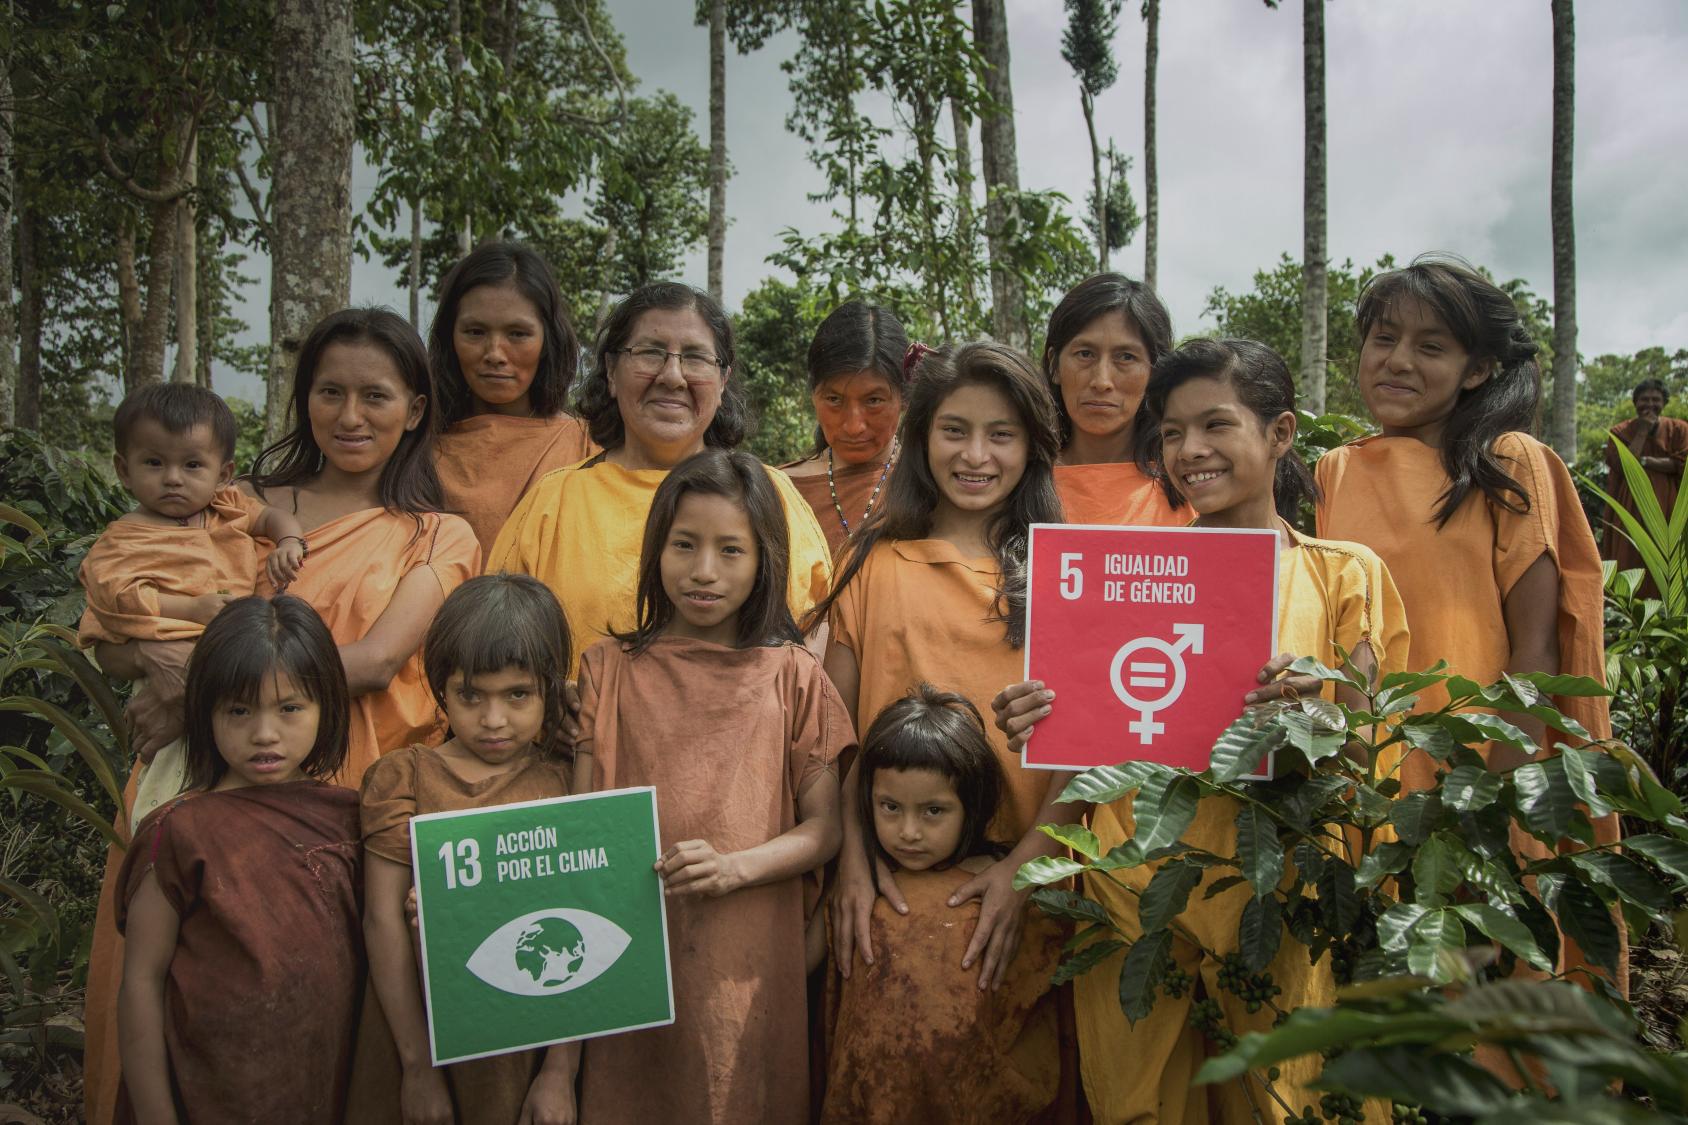 A group of indigenous women and girls smile as they hold signs for SDG 5 and 13. 